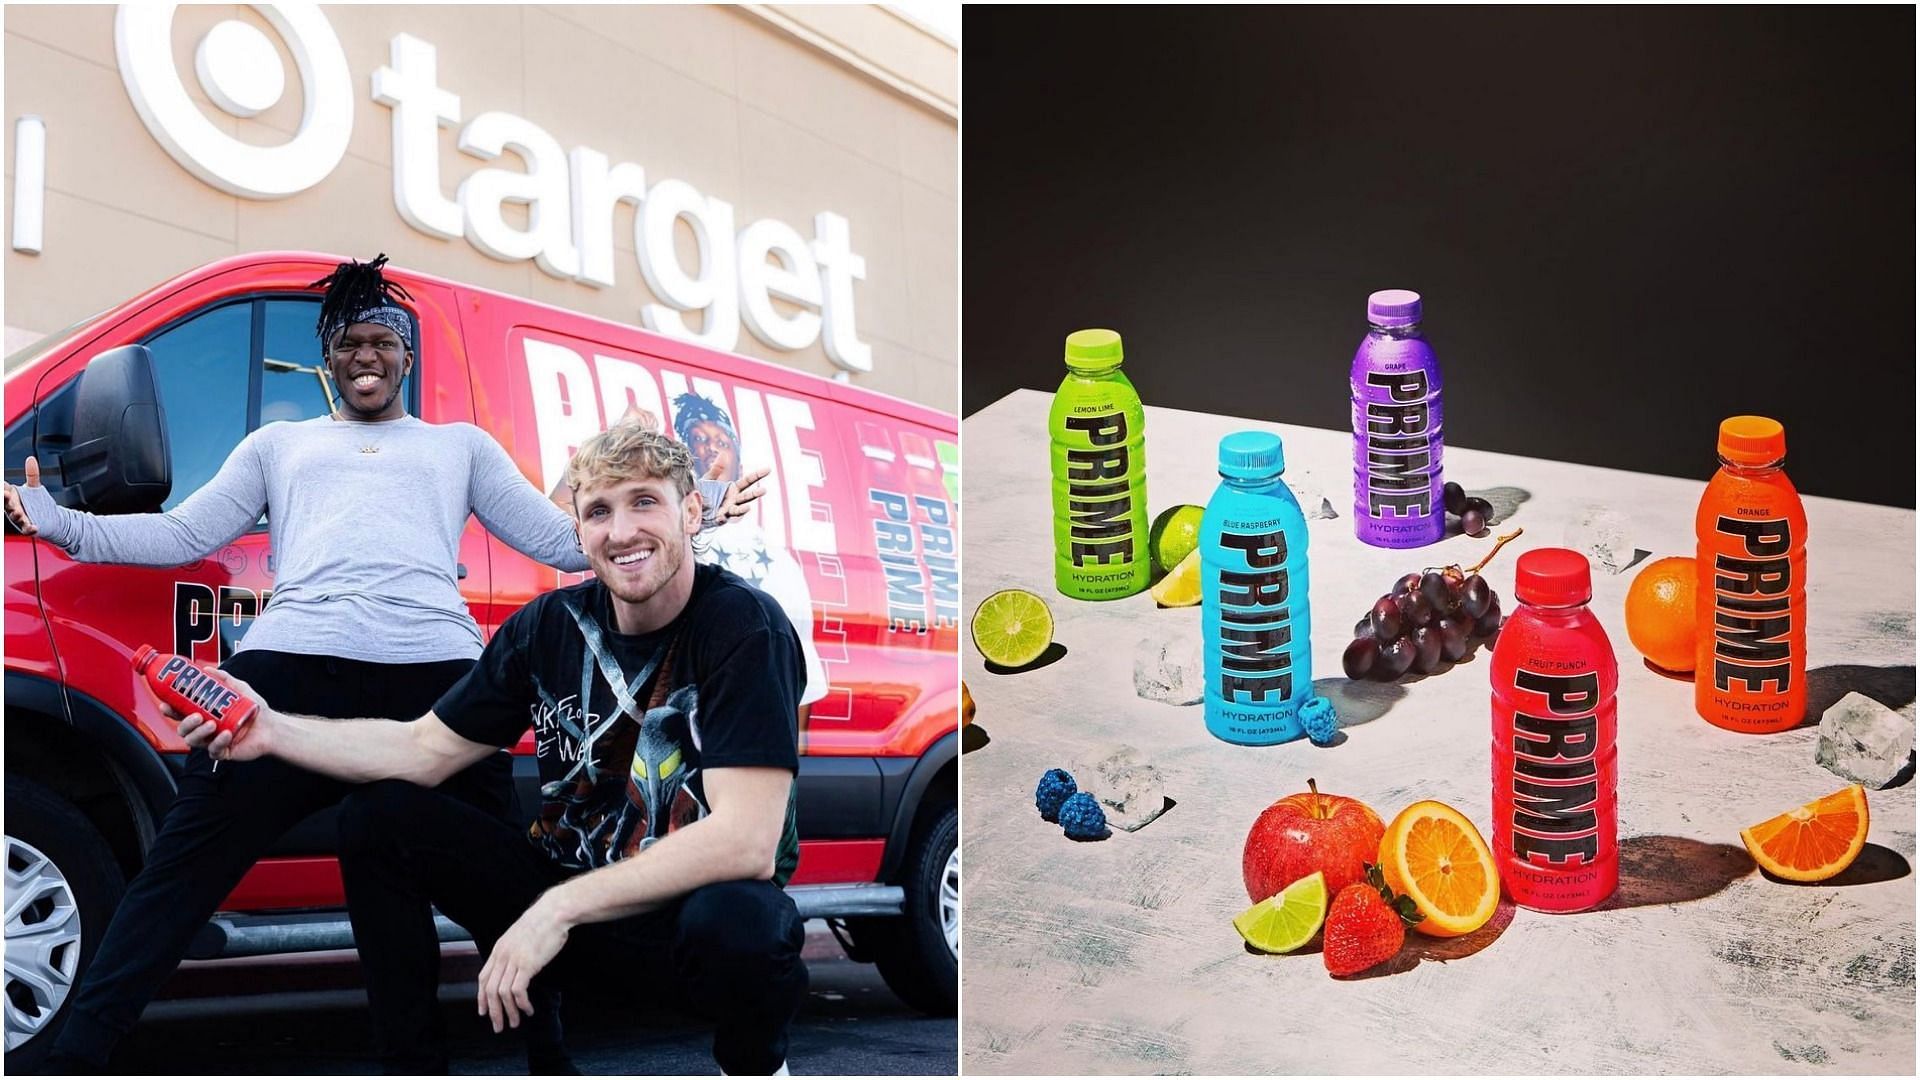 Where to Find Prime? Logan Paul and KSI's Drink Signs Deal With UFC -  Bloomberg